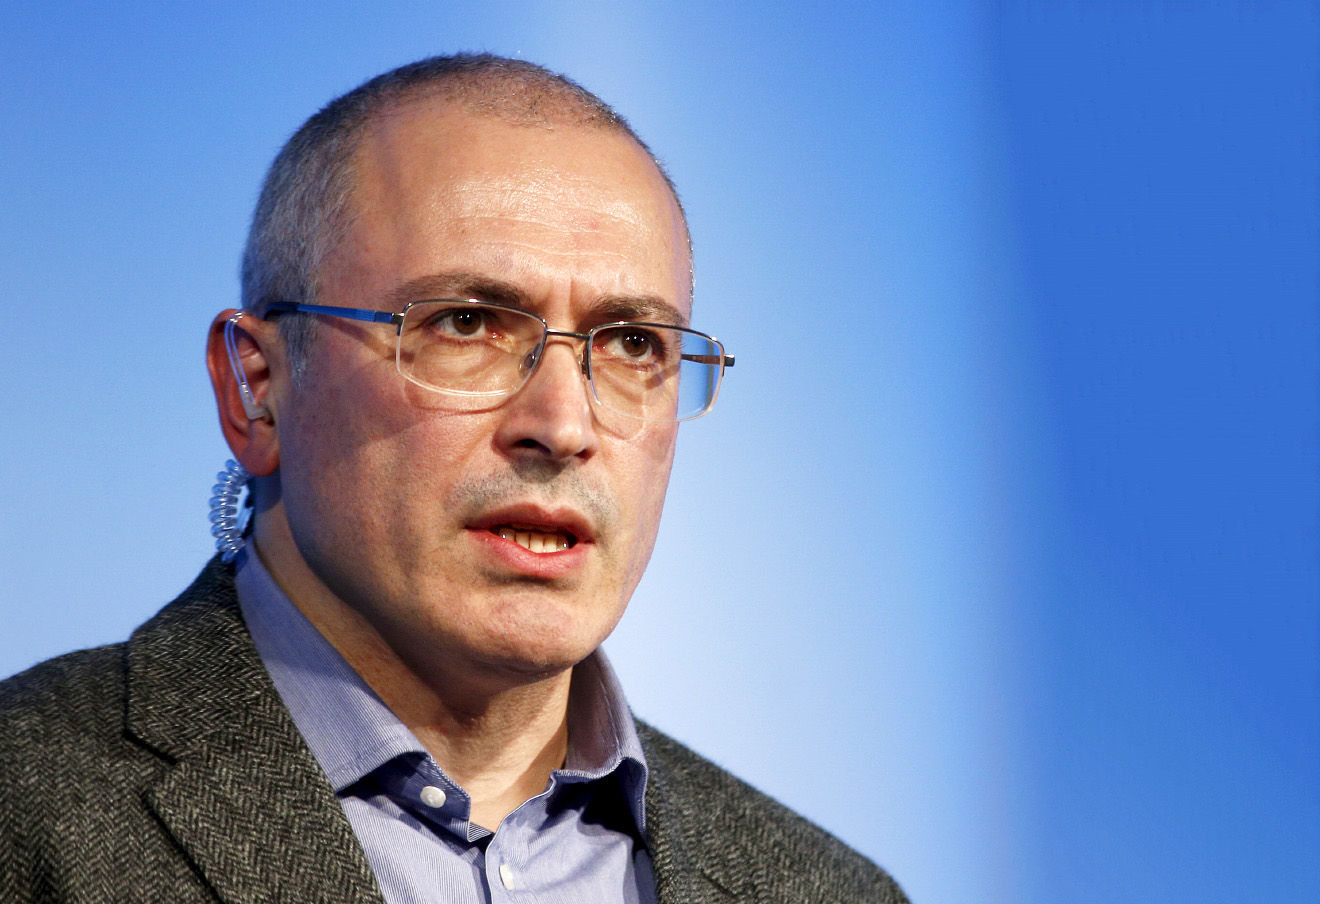 Former Russian tycoon Mikhail Khodorkovsky speaks during a Reuters Newsmaker event at Canary Wharf in London